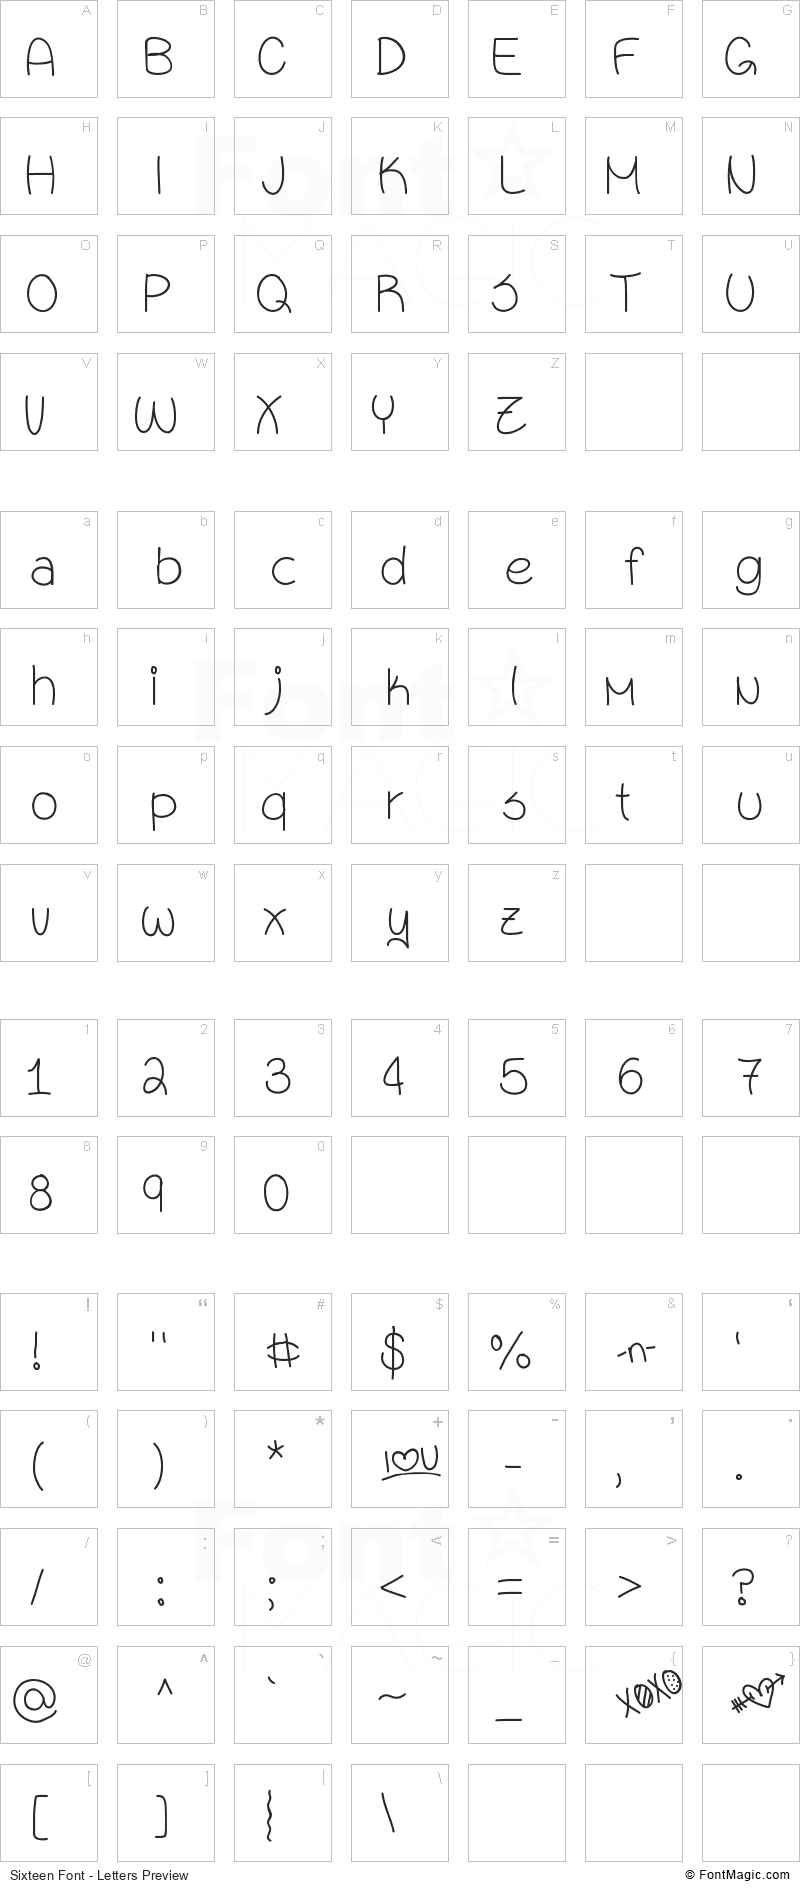 Sixteen Font - All Latters Preview Chart